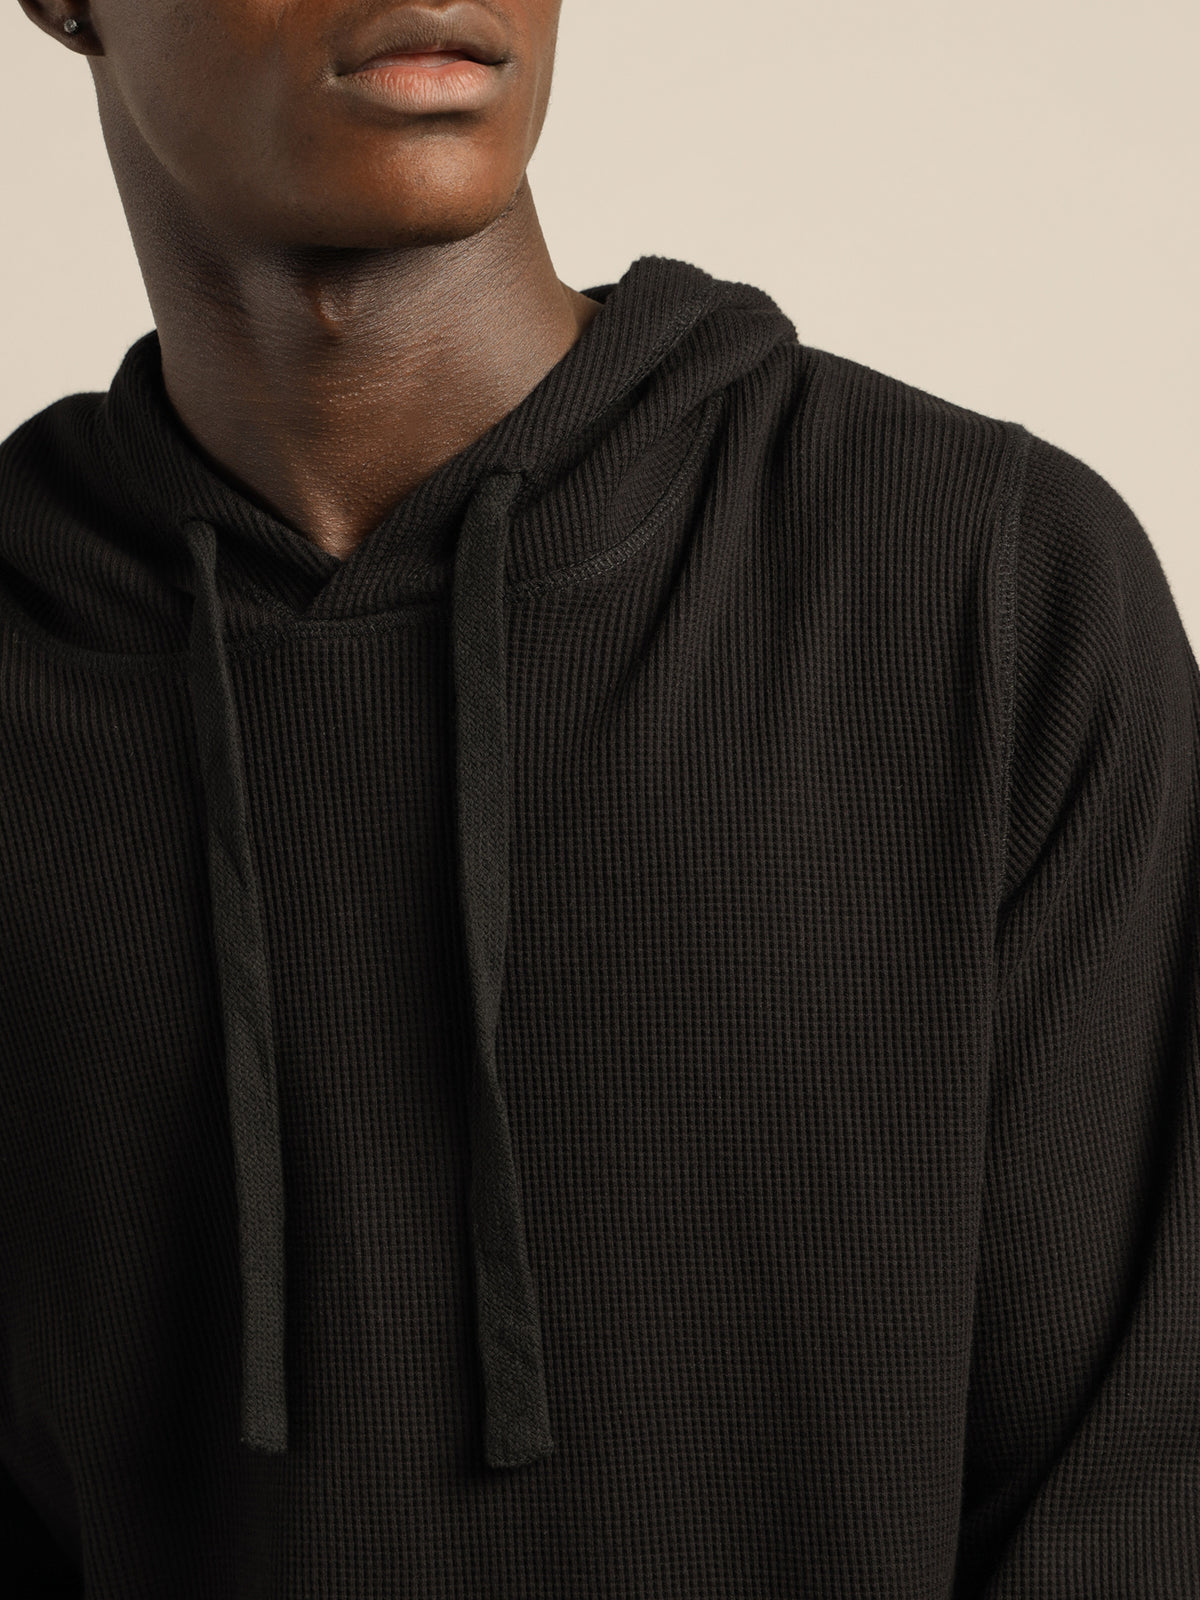 Maison Waffle Hooded Sweater in Black